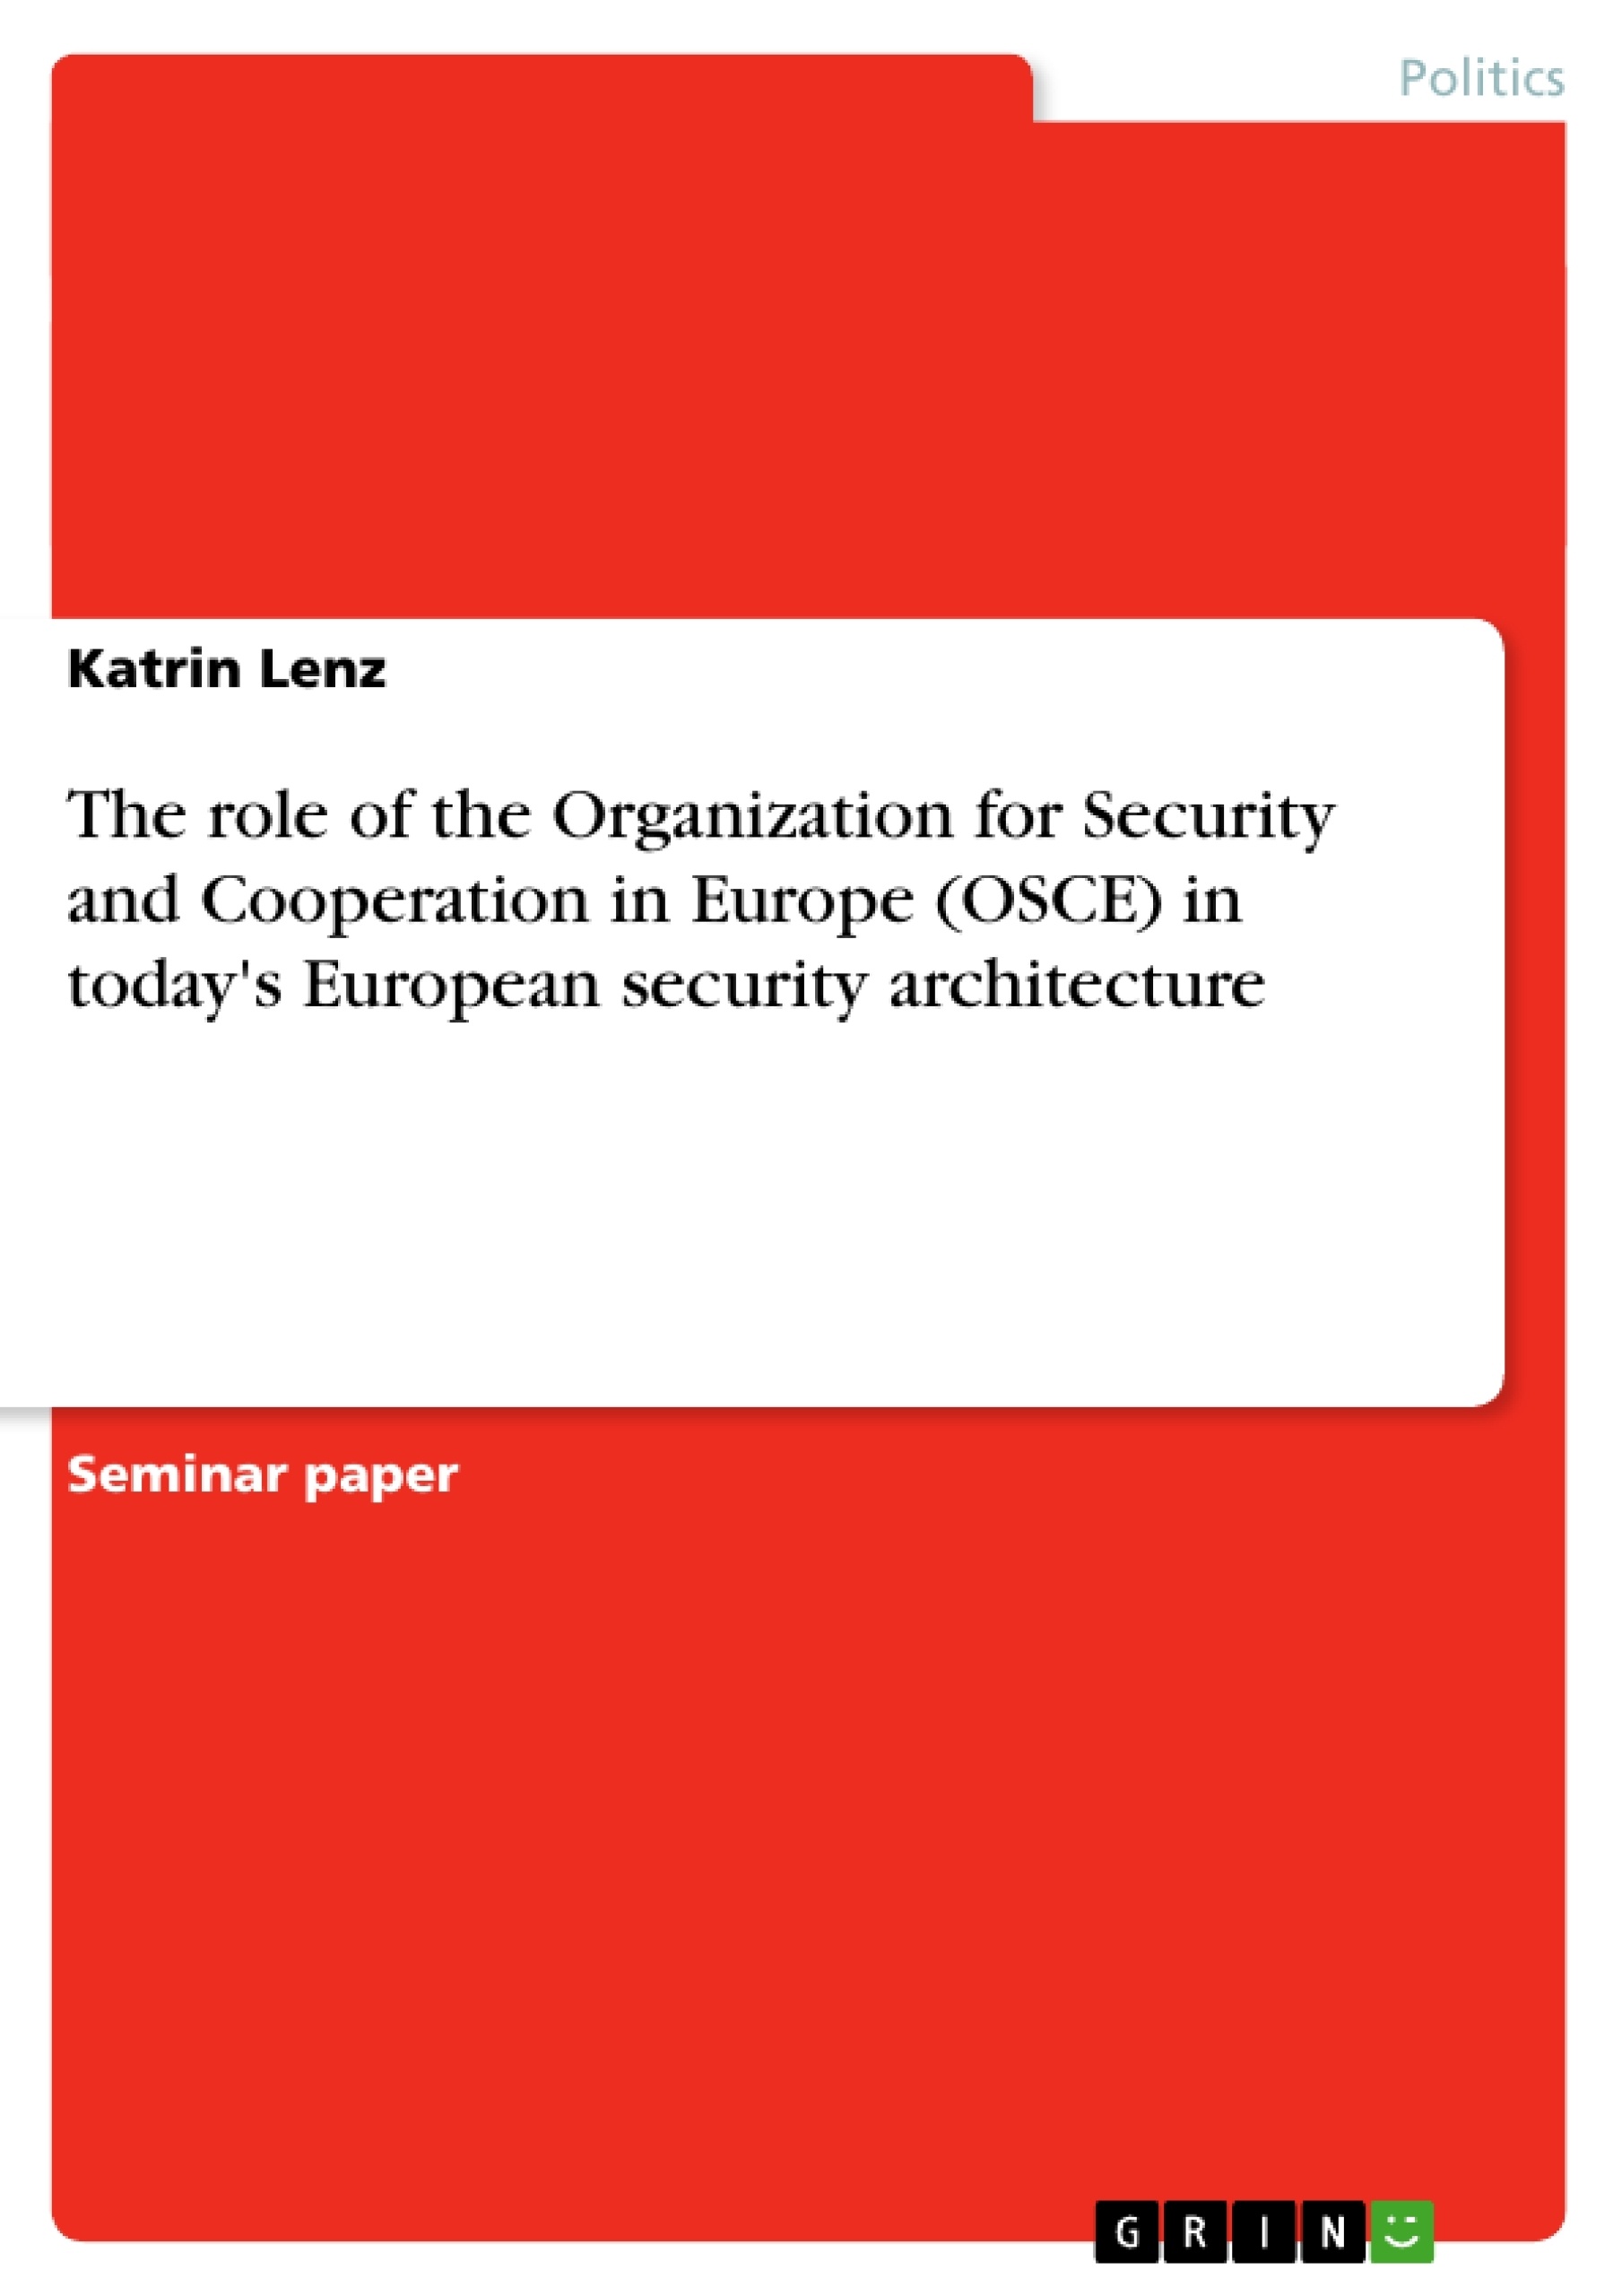 Title: The role of the Organization for Security and Cooperation in Europe (OSCE) in today's European security architecture